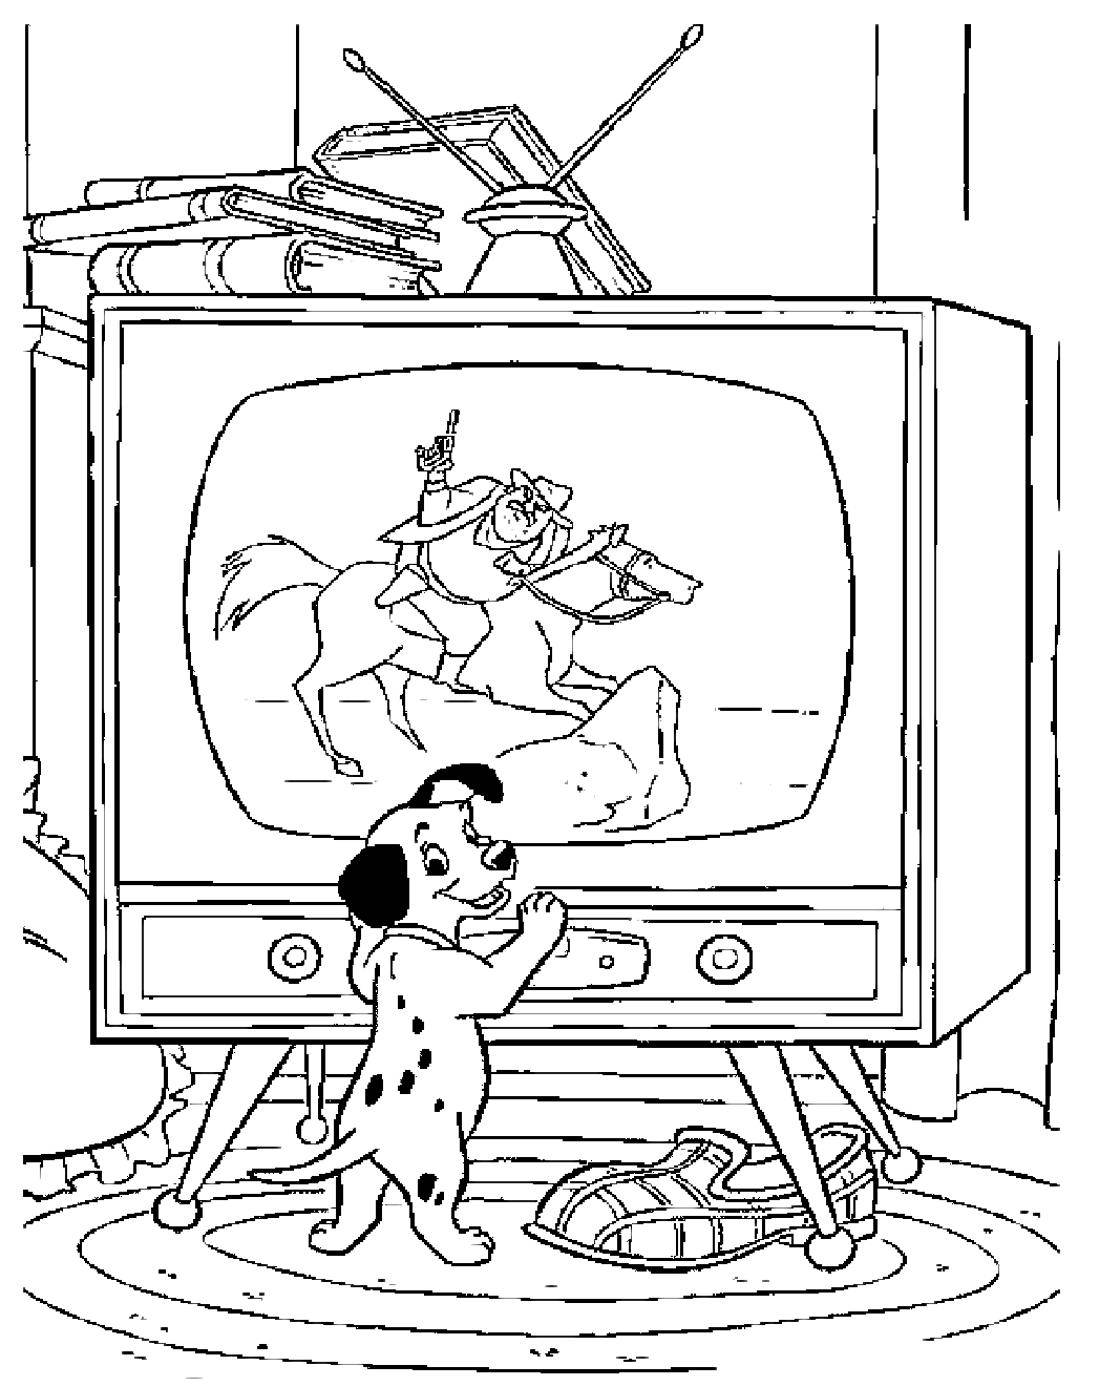 Coloring Dalmatians looks Western. Category TV. Tags:  Technique.